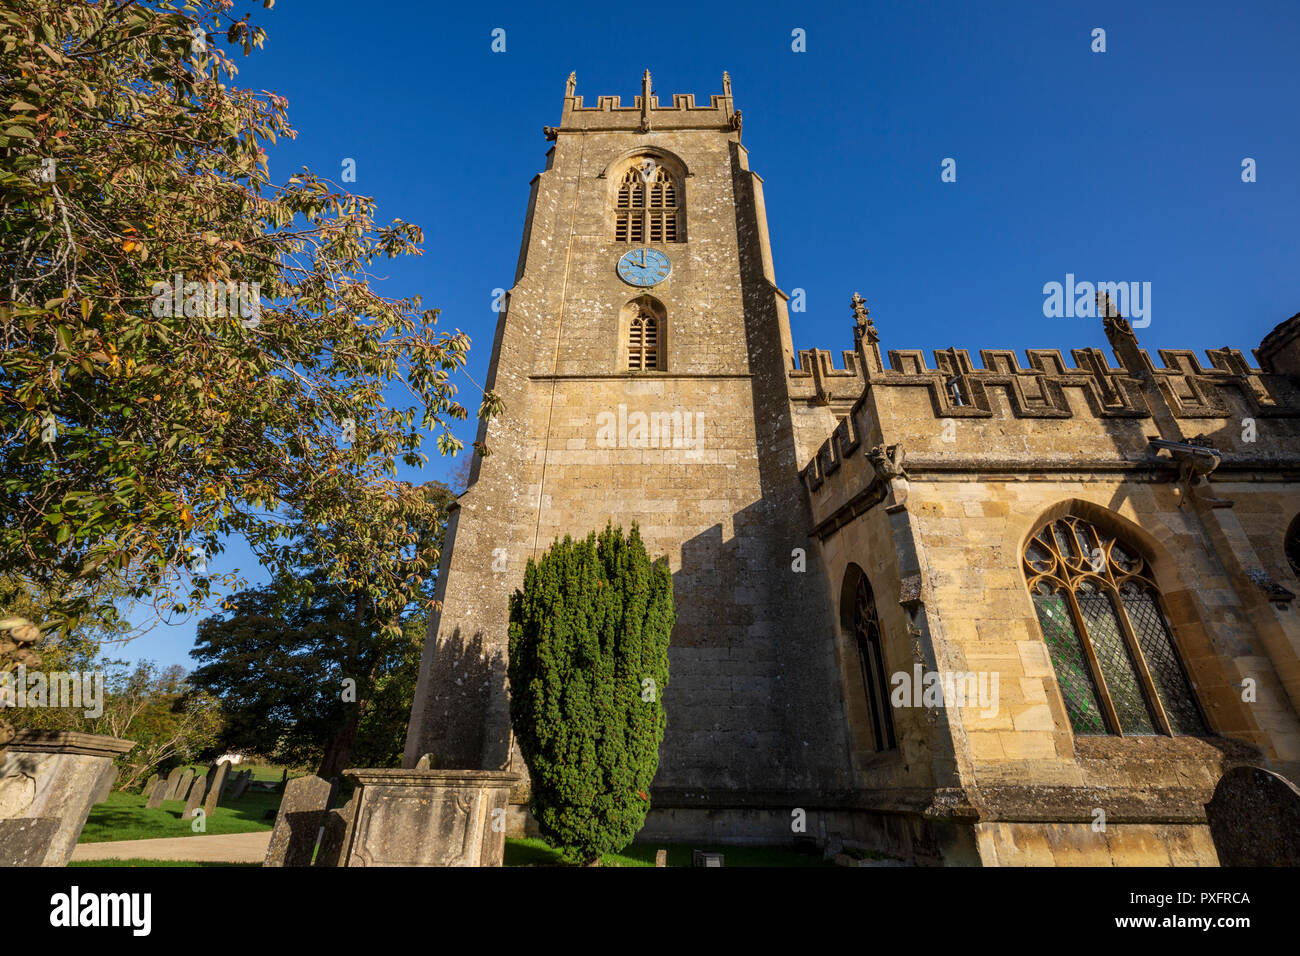 St Peter's Church at Winchcombe, Cotswolds, Gloucestershire, England Stock Photo